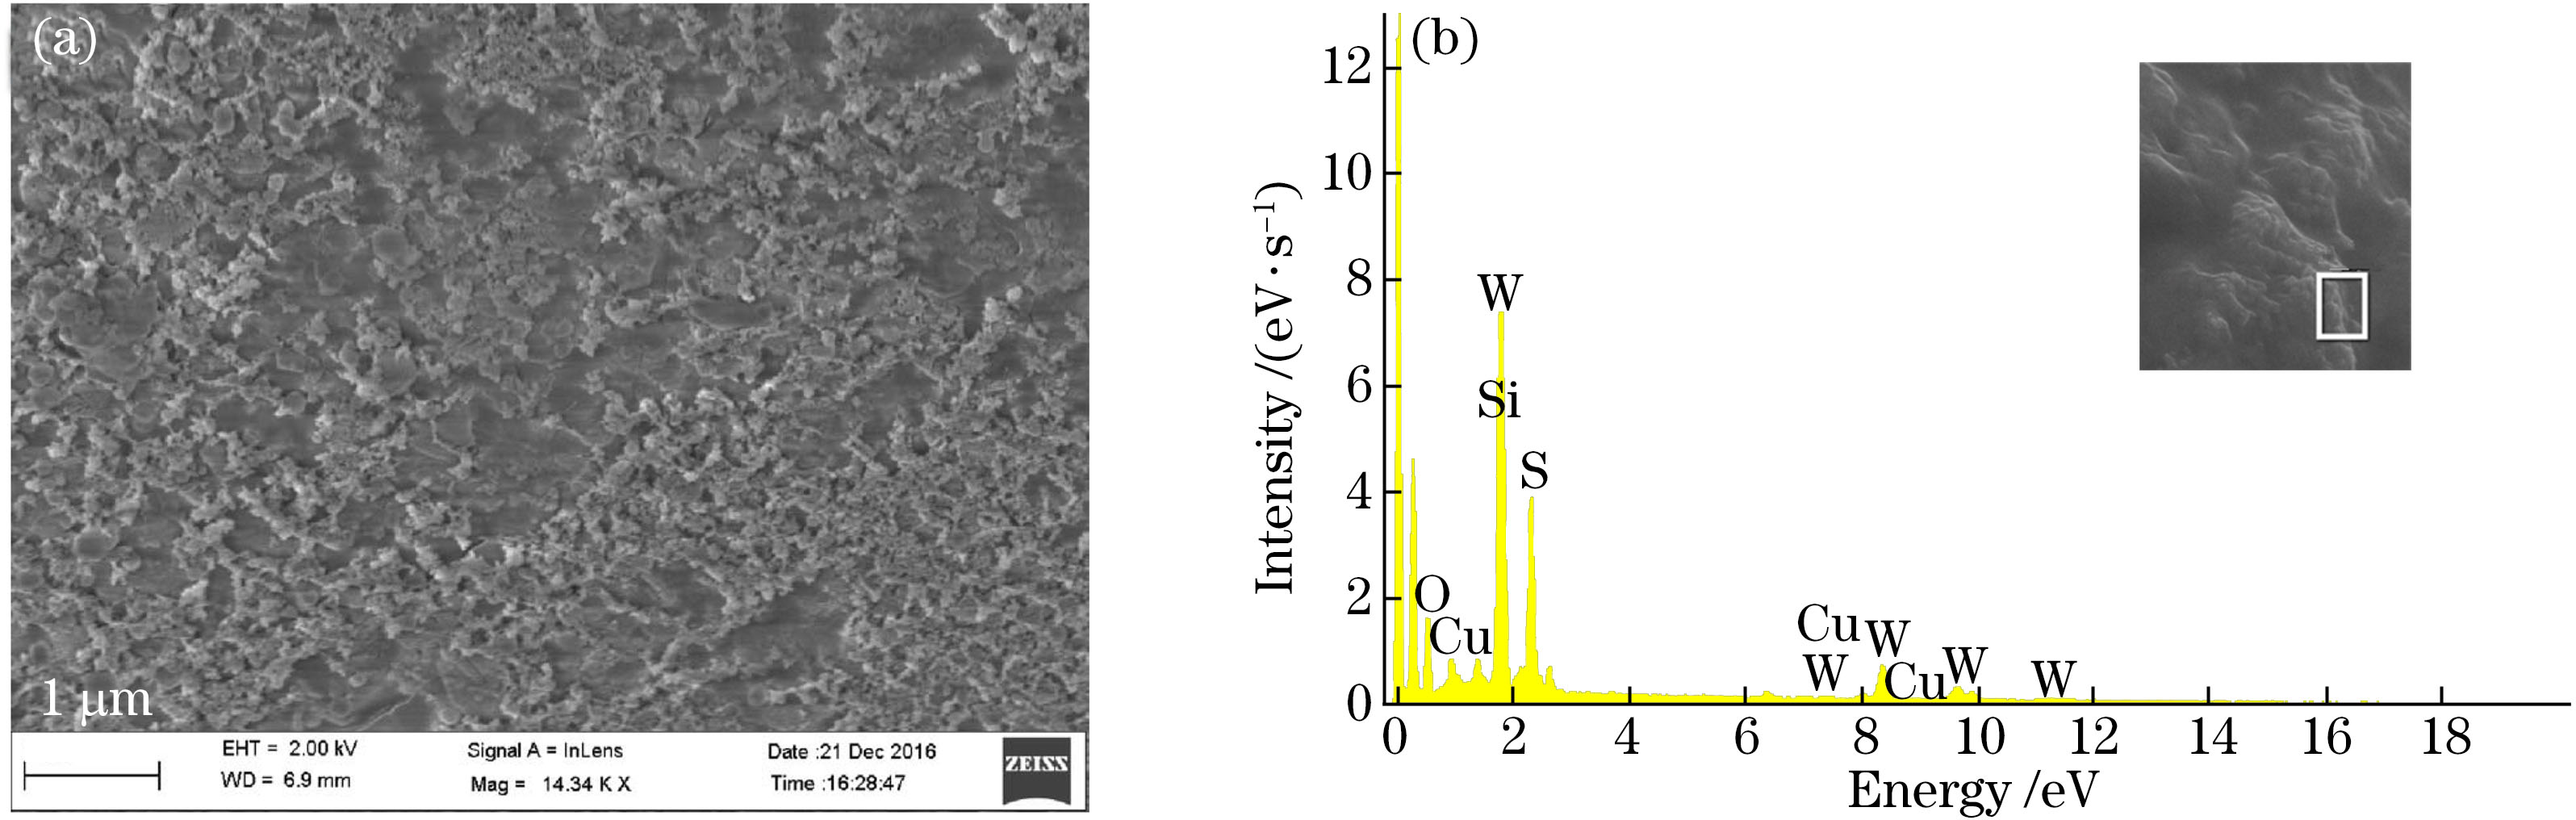 (a) SEM image of the side surface of the thin-core fiber coated with Cu-deposited WS2 film; (b) EDX image for Cu-deposited WS2-coated fiber